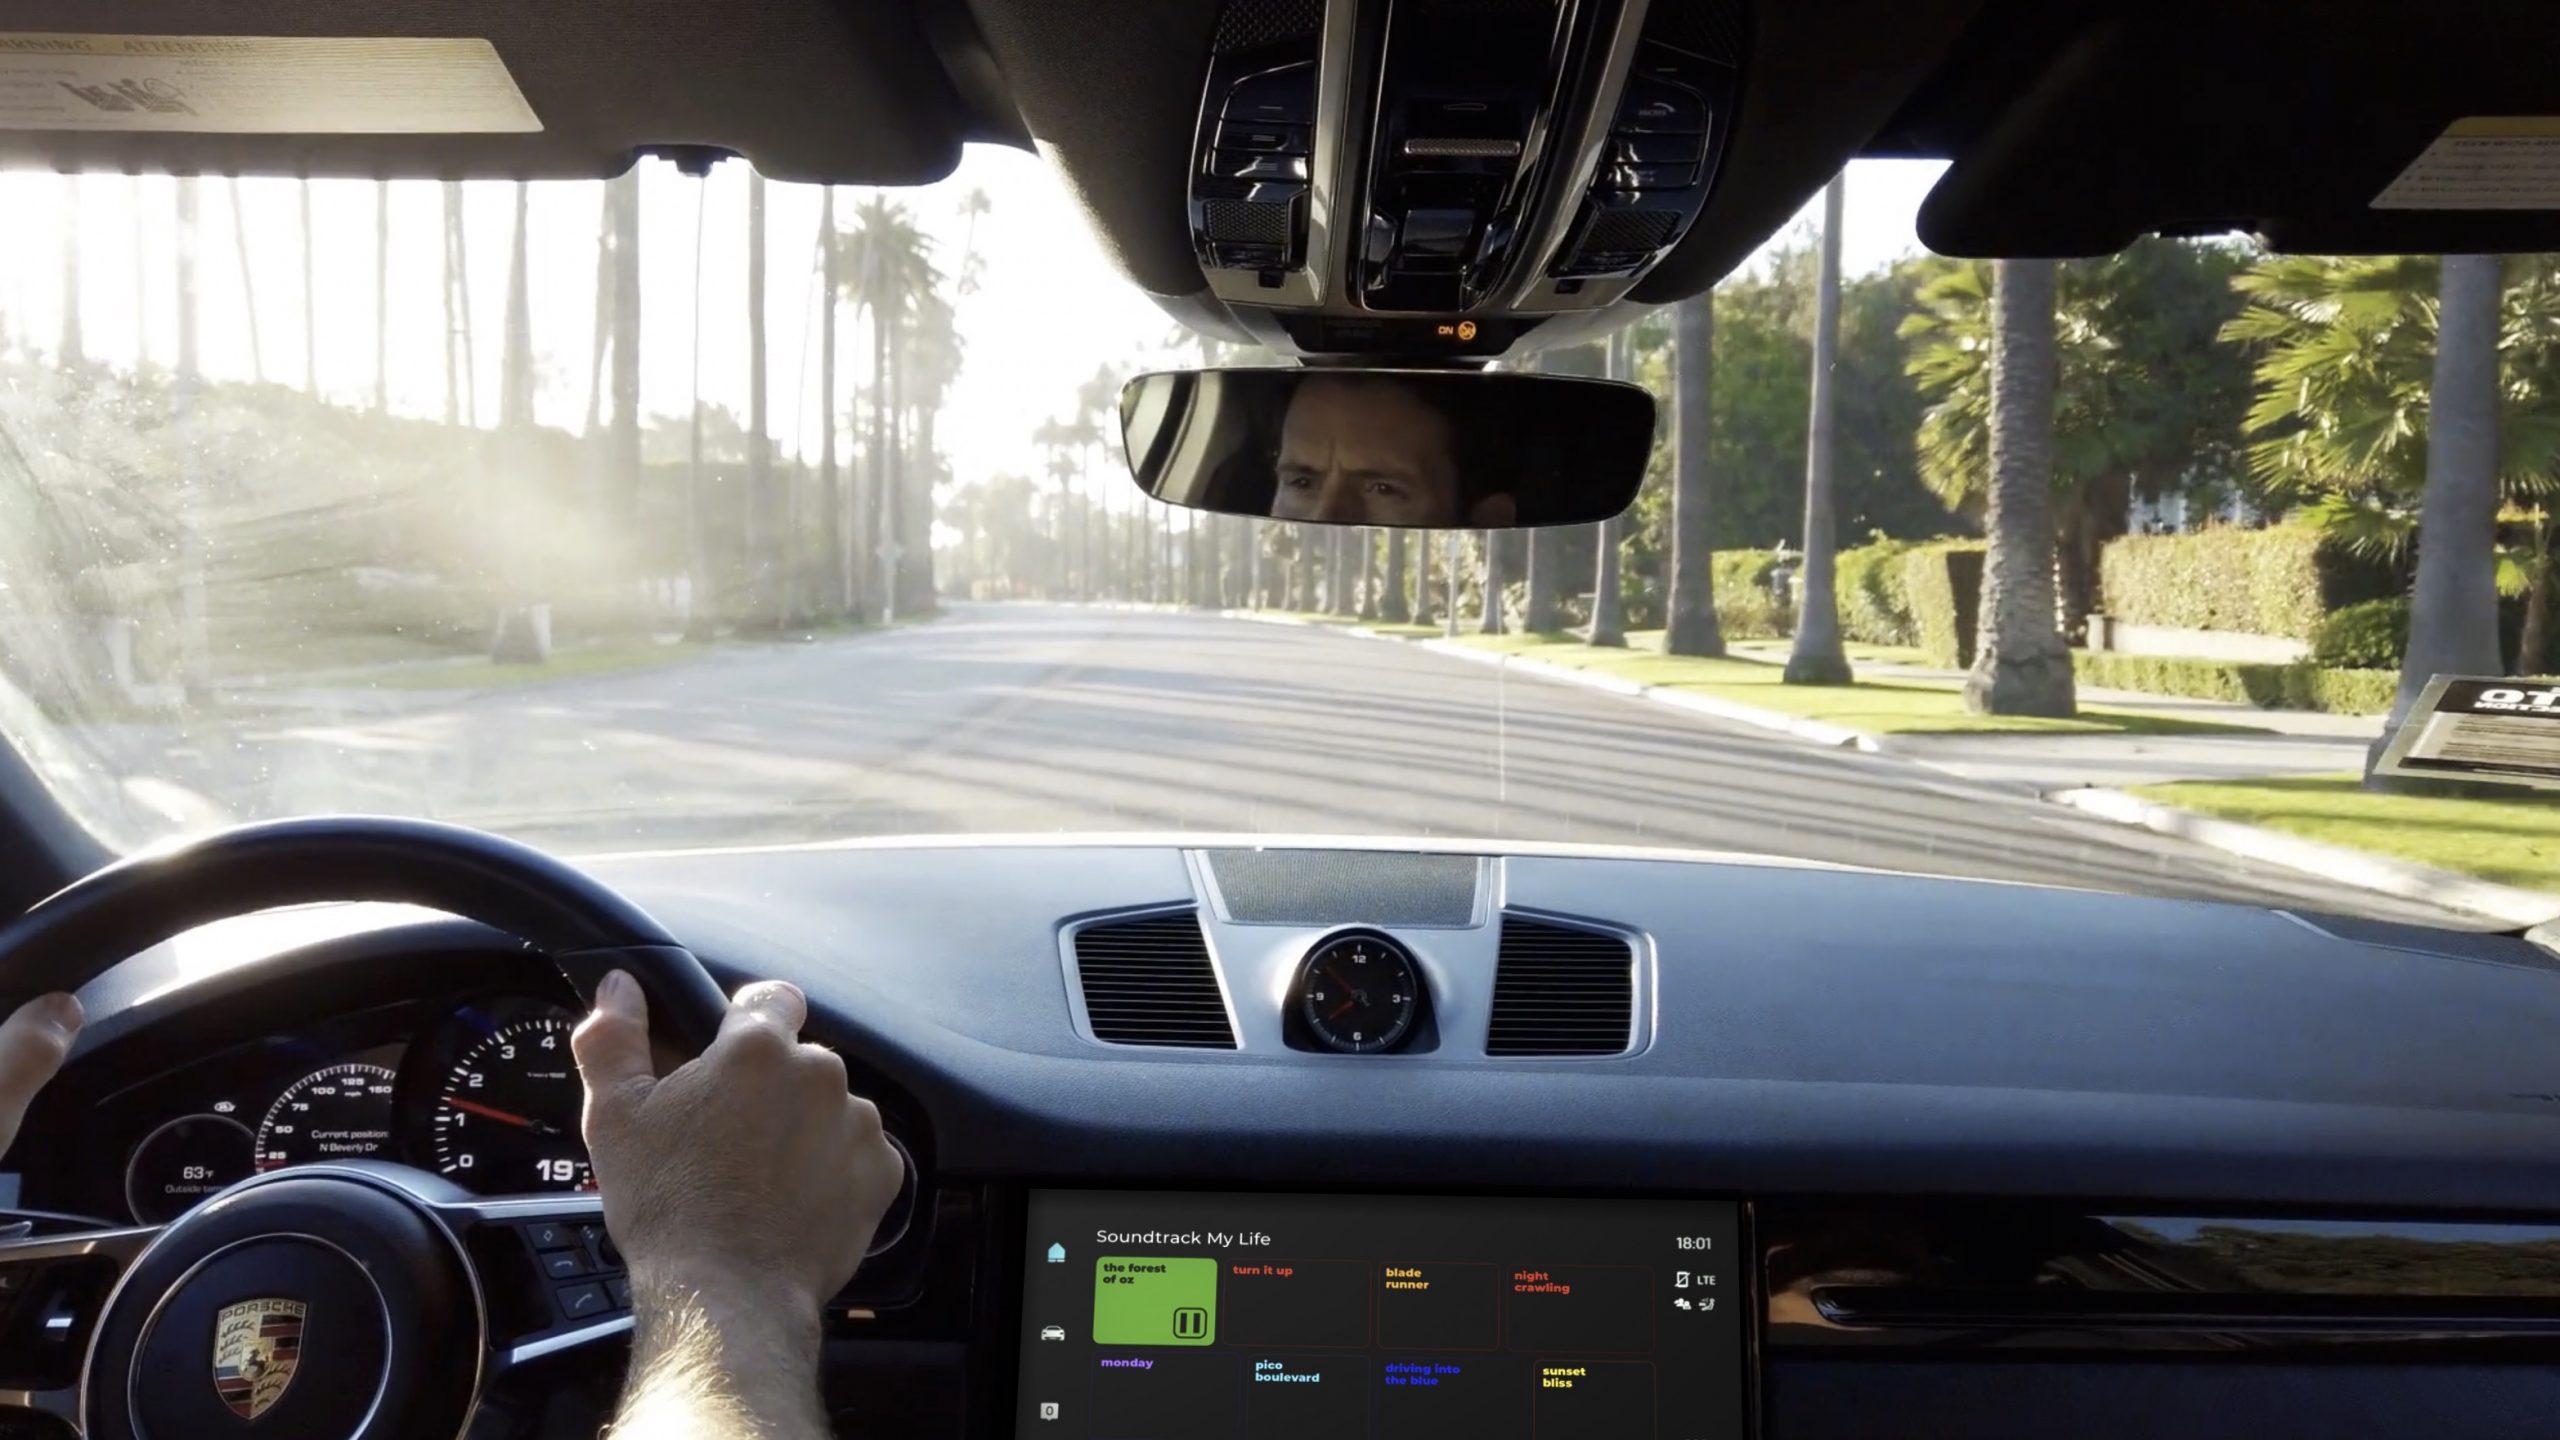 Porsche’s ‘Soundtrack My Life’ generates original music that adjusts to your driving style